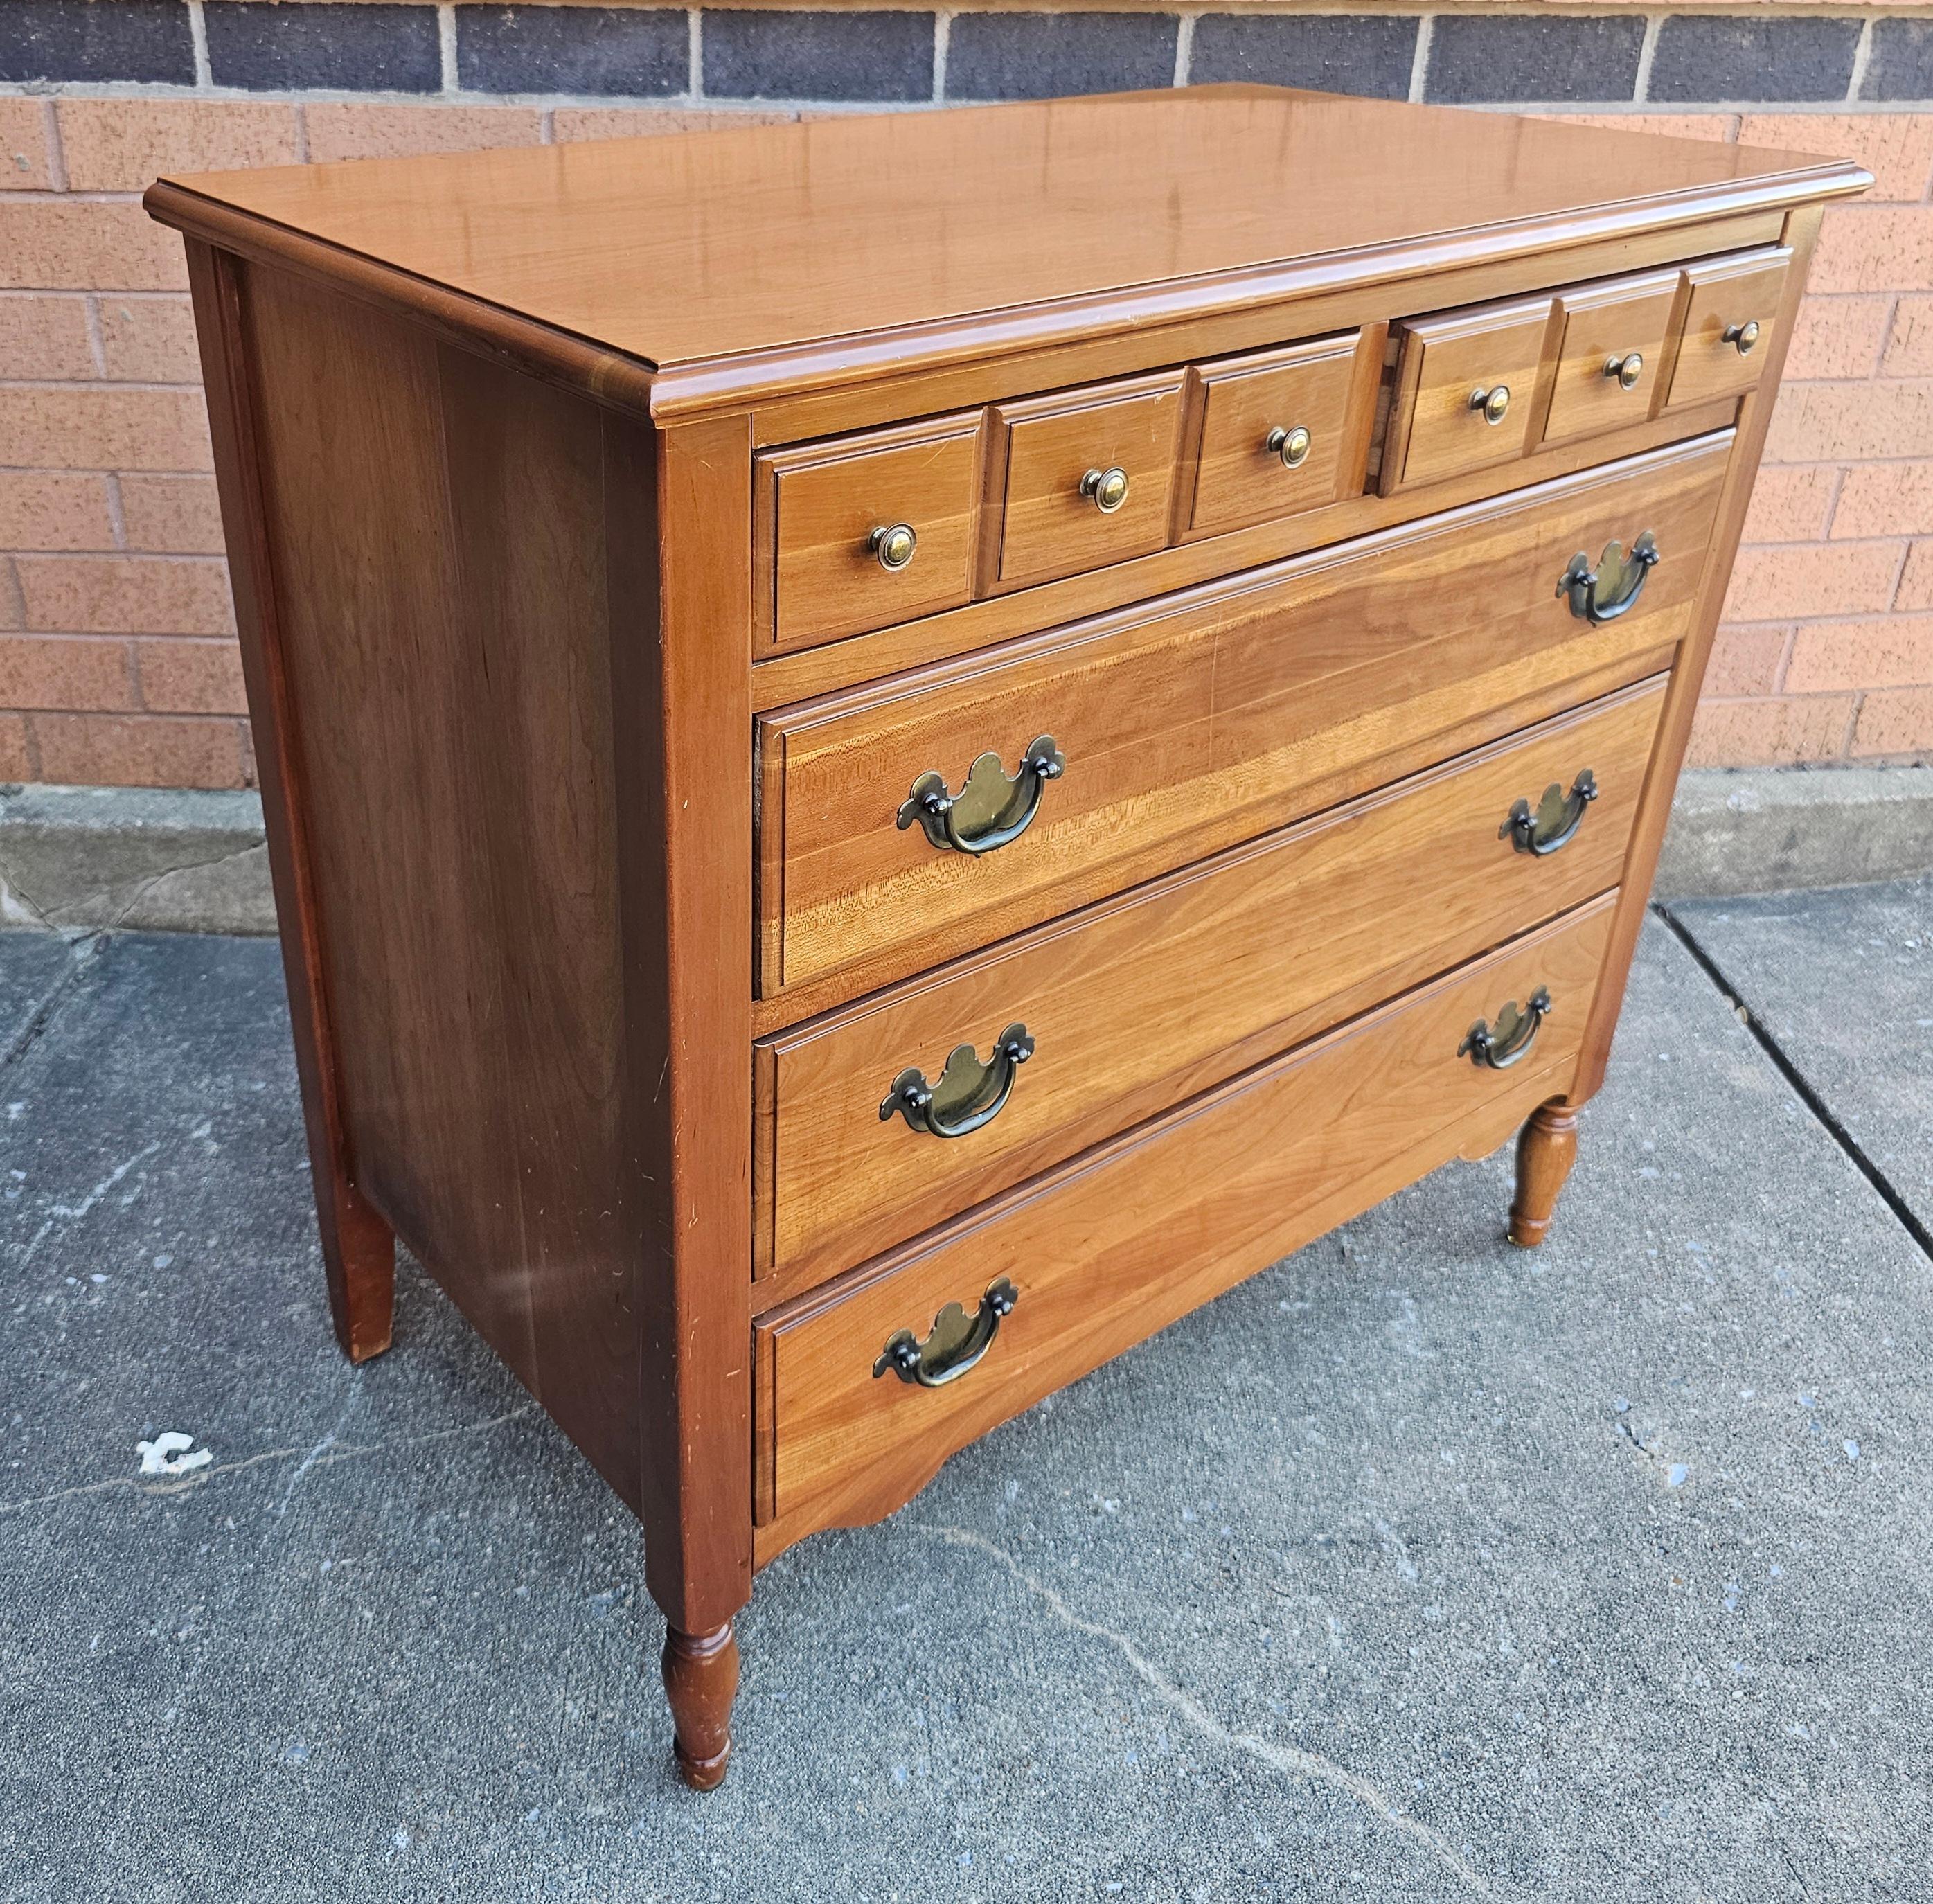 Mid 20th C. Sanford Furniture Permacraft  Five-Drawer Bachelor Chest of Drawers. Features two top drawers and three large bottom drawers. All Smooth operating dovetail joints drawers Wood backing. Measures 32